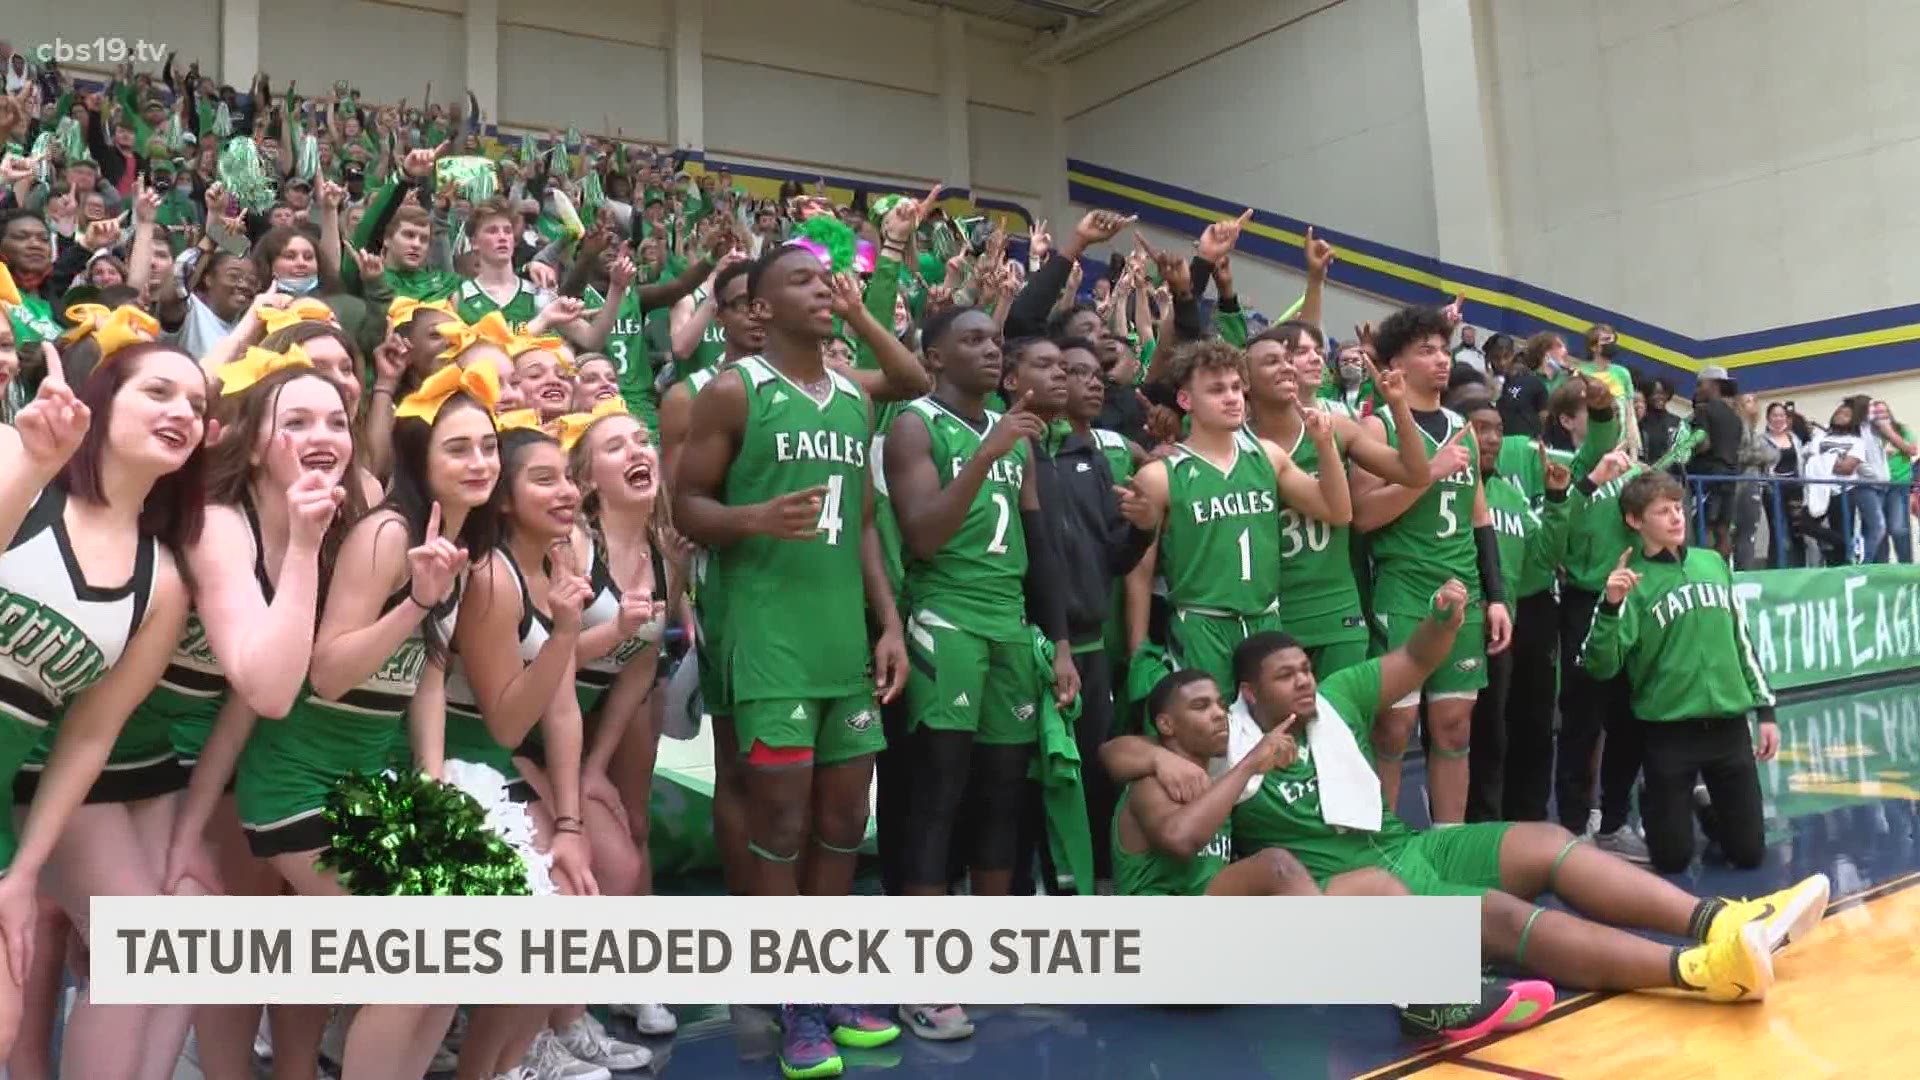 The Tatum Eagles are headed back to the 3A State Championship game for the first time since 2014.